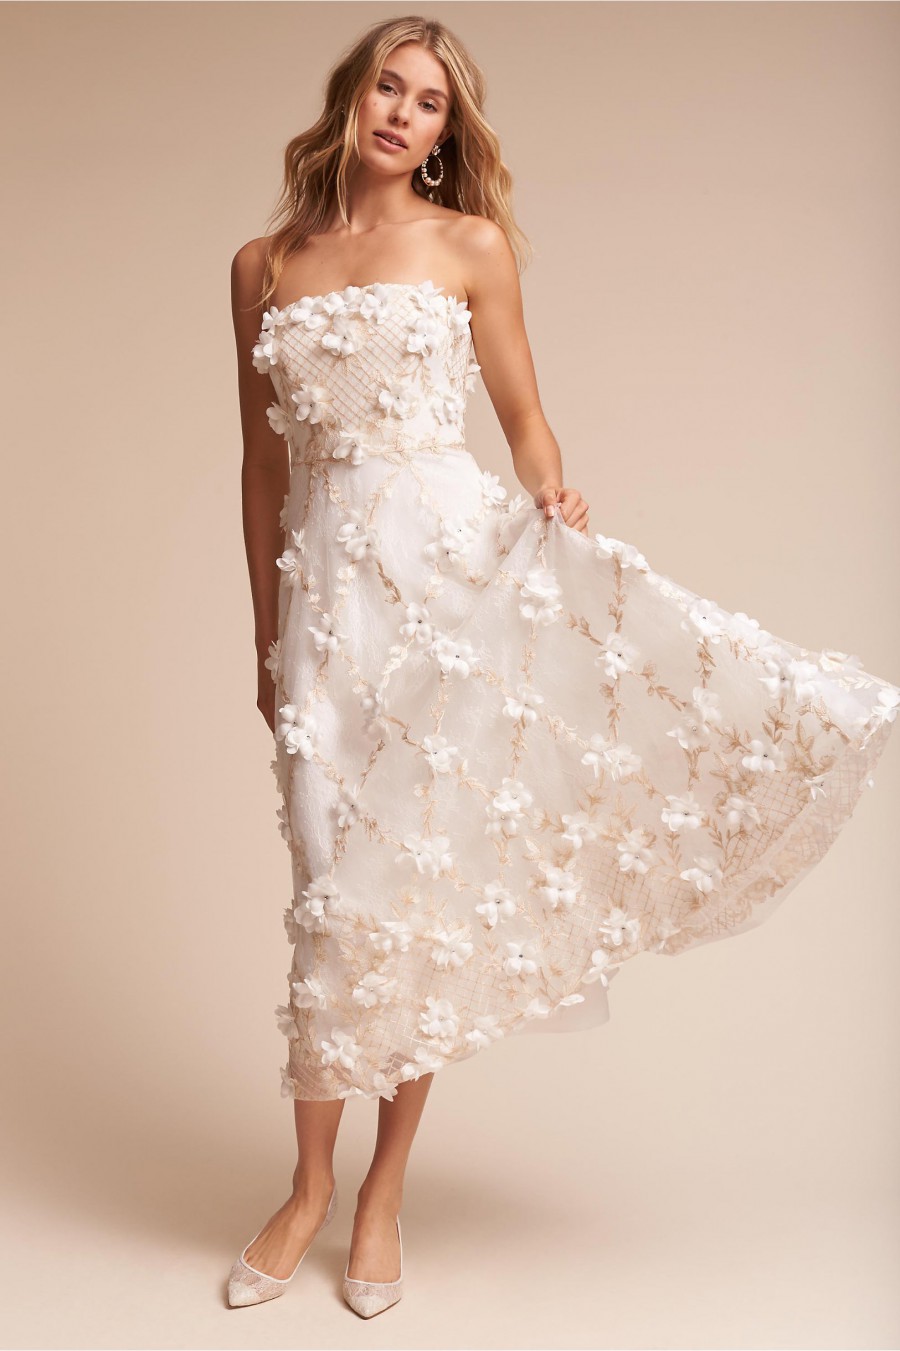 Best Midi Dresses For Wedding  The ultimate guide 